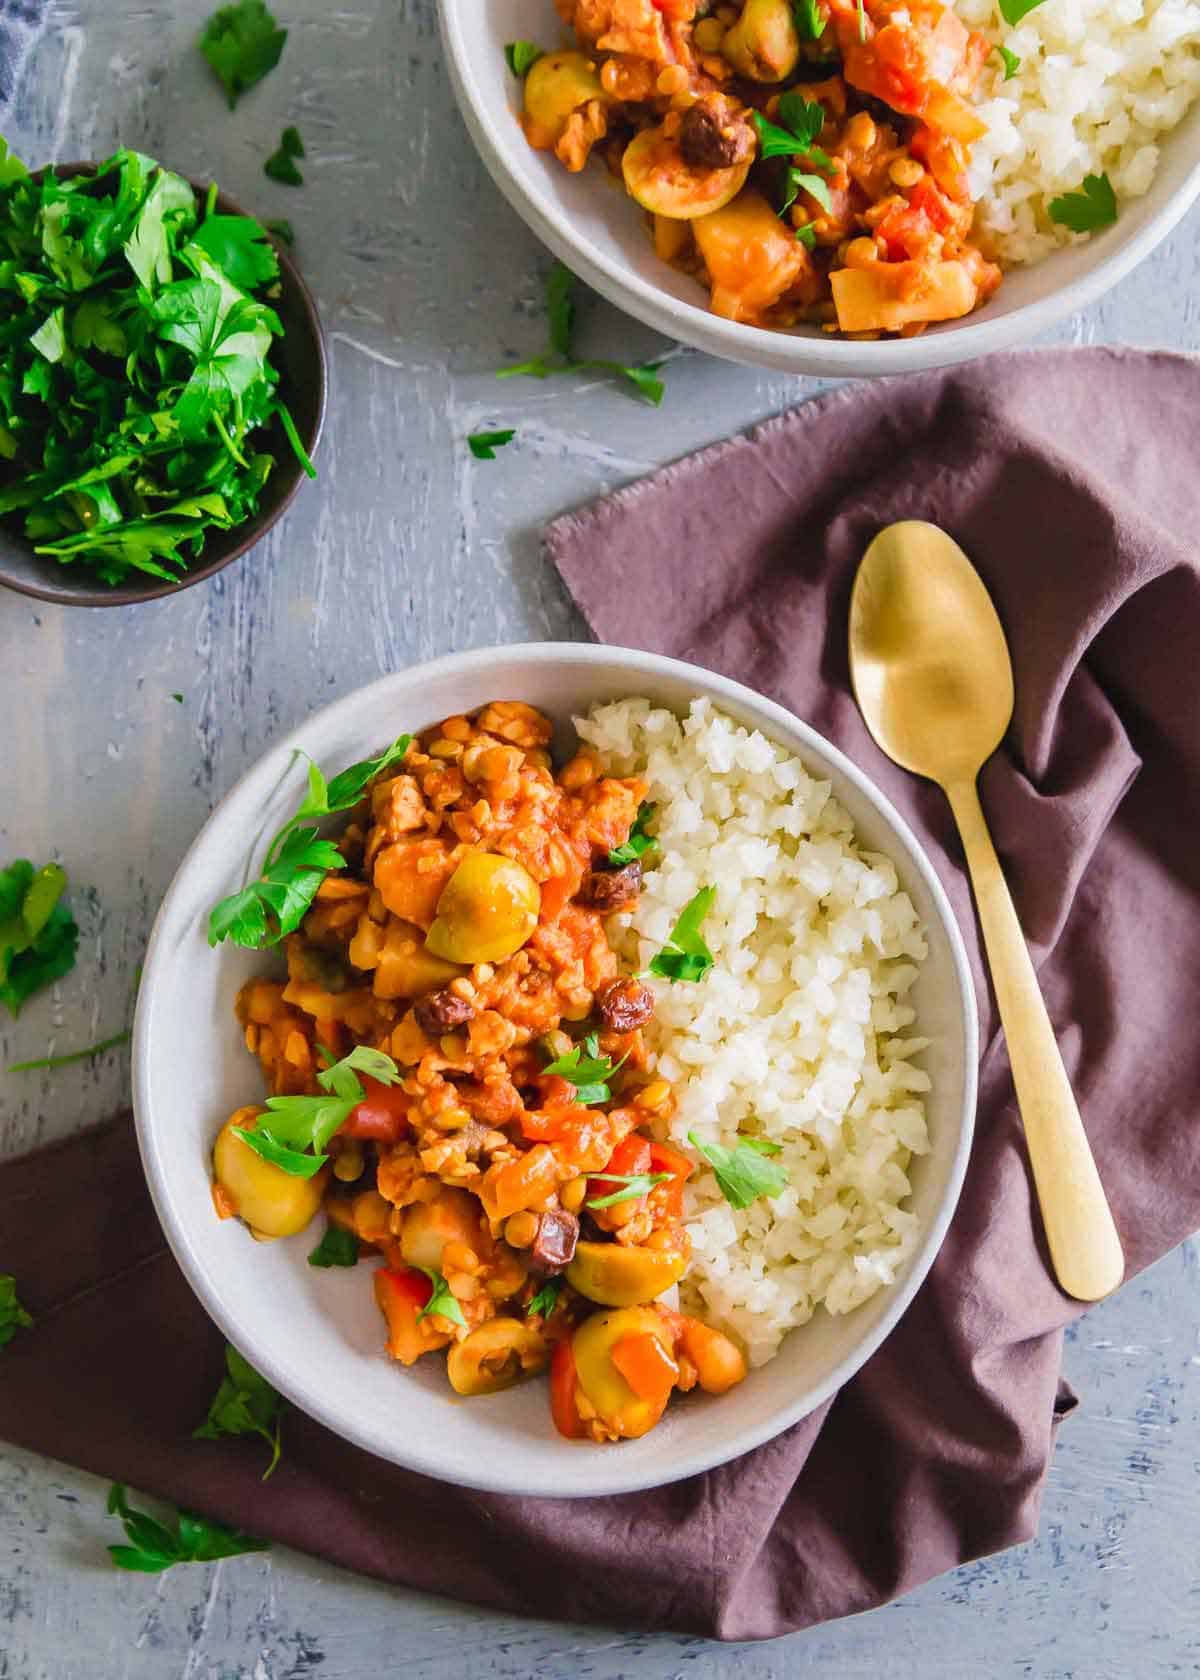 Vegan picadillo is a plant based version of this traditional Cuban recipe made with tempeh, lentils and potatoes. It's packed with big flavors from Spanish olives, capers, raisins and spices in a hearty tomato base.